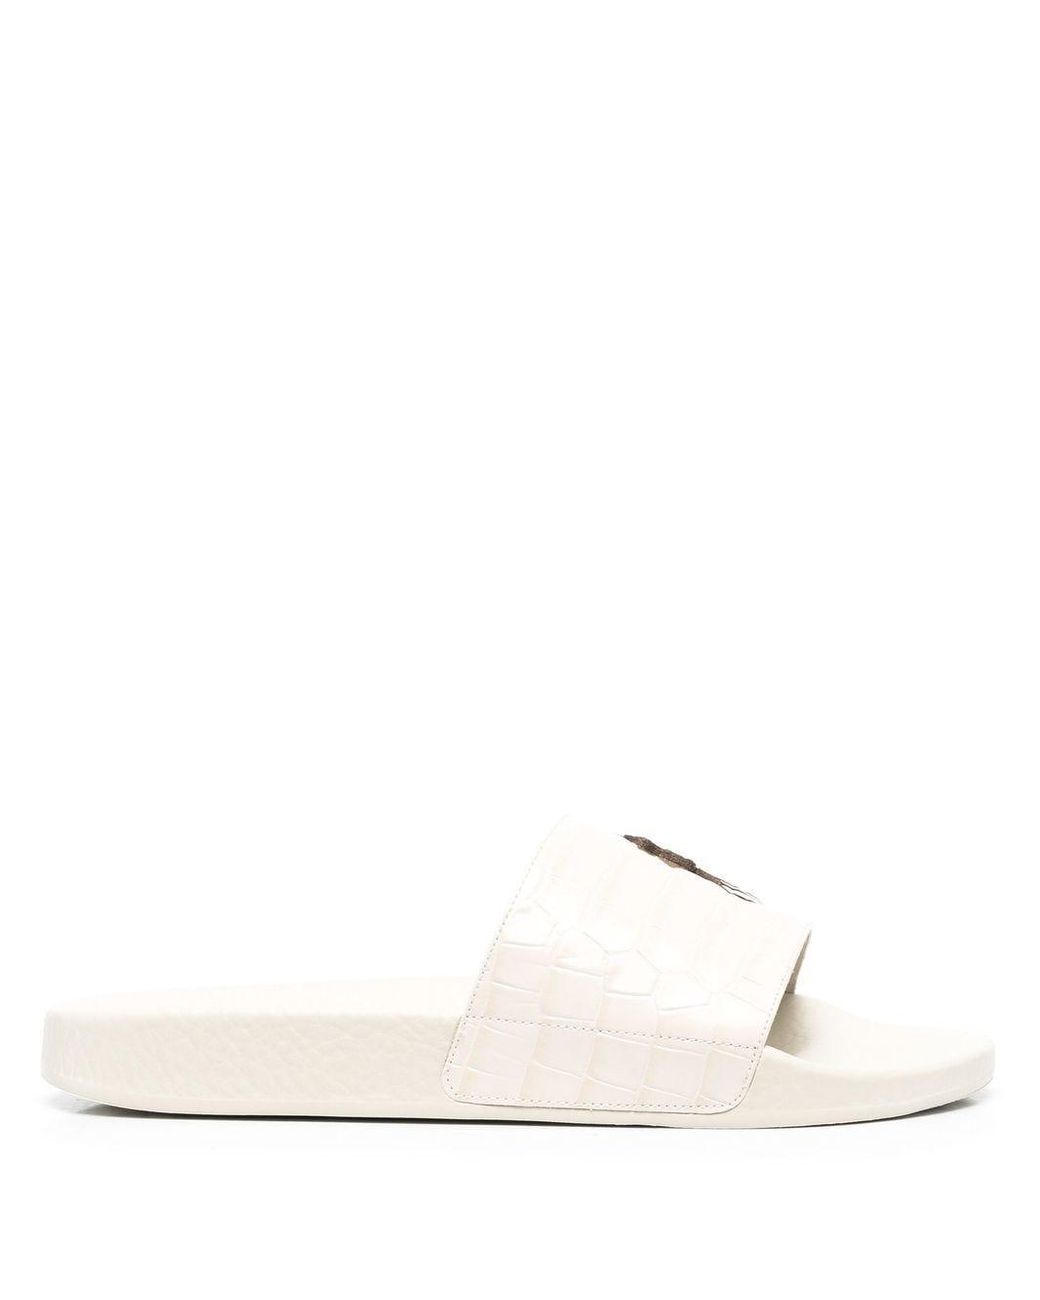 Polo Ralph Lauren Polo Pony Leather Sliders in Natural | Lyst UK